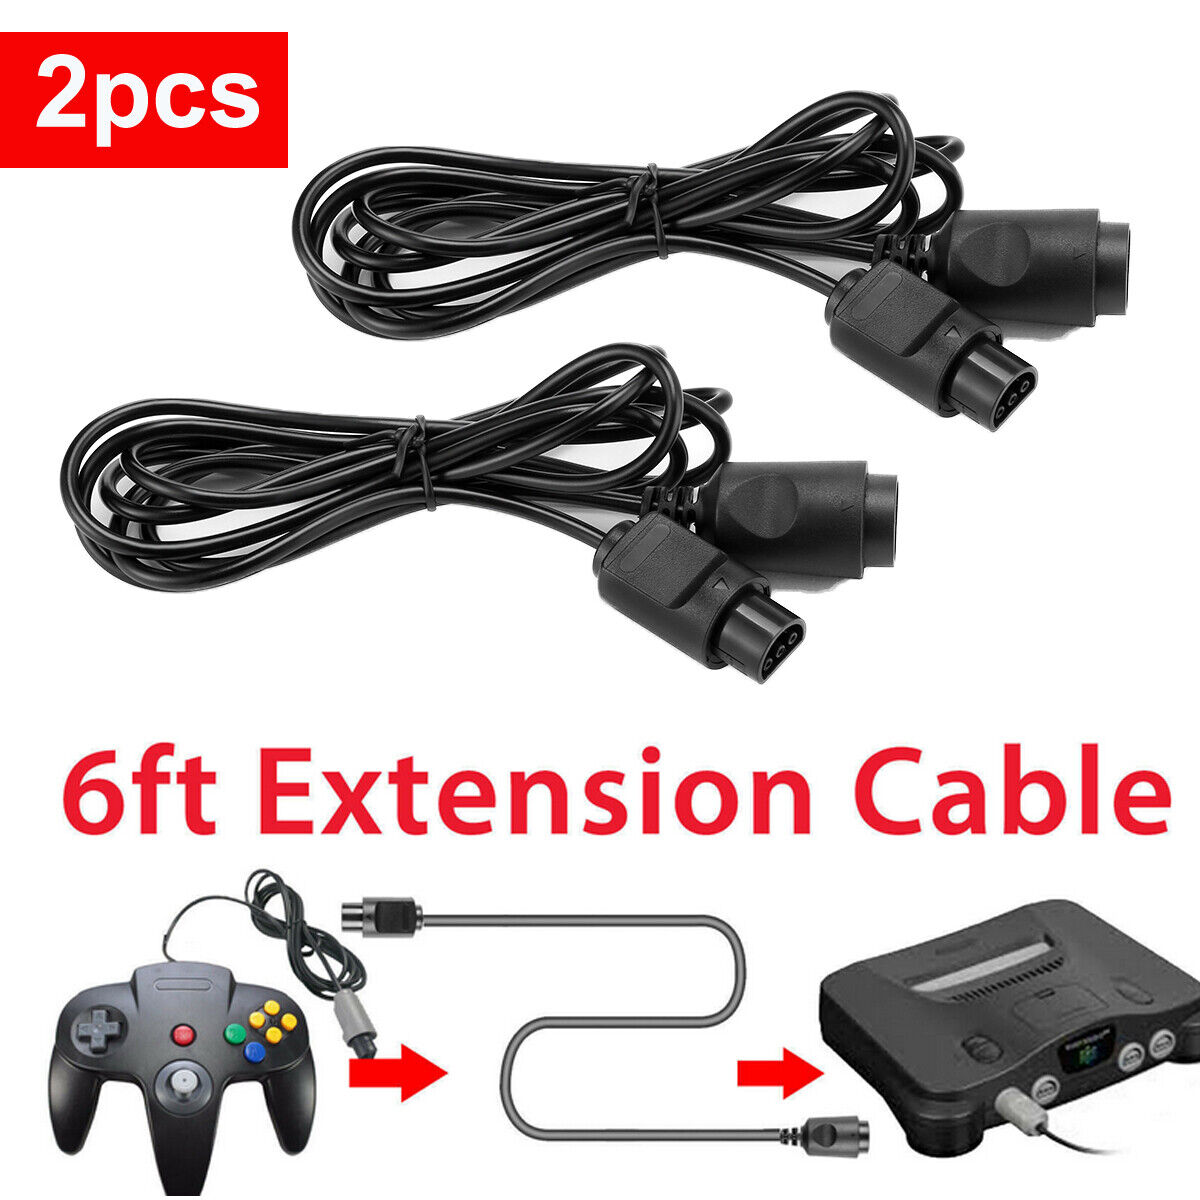 2 Pack Extended Extension Cable Cord for Nintendo 64 Controller N64 Game Console